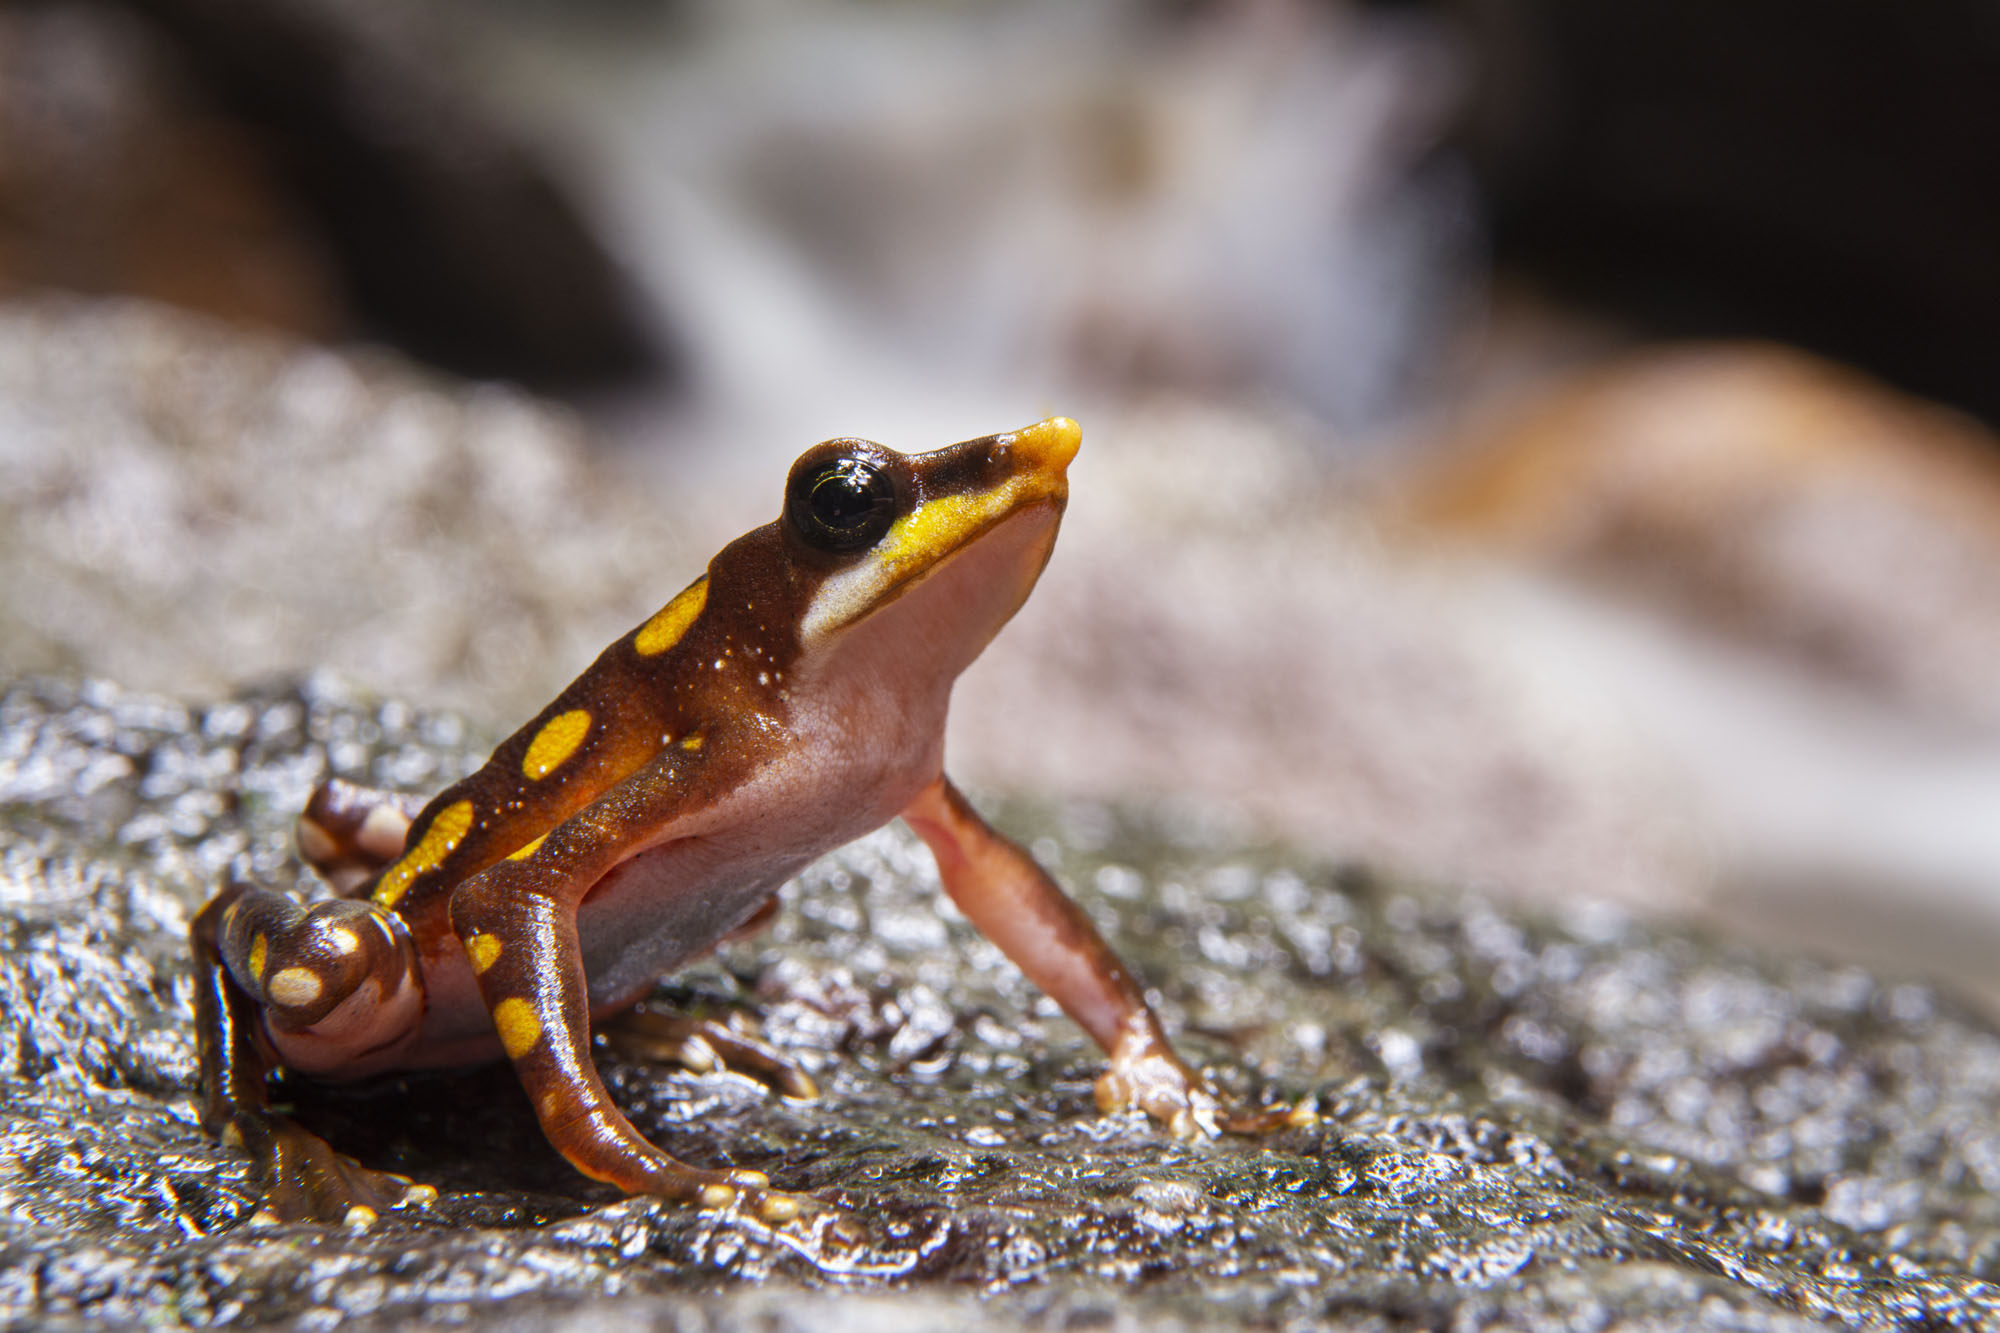 Rediscovered longnose harlequin toad classified as critically endangered on same day Ecuadorian court hears case to determine species’ future